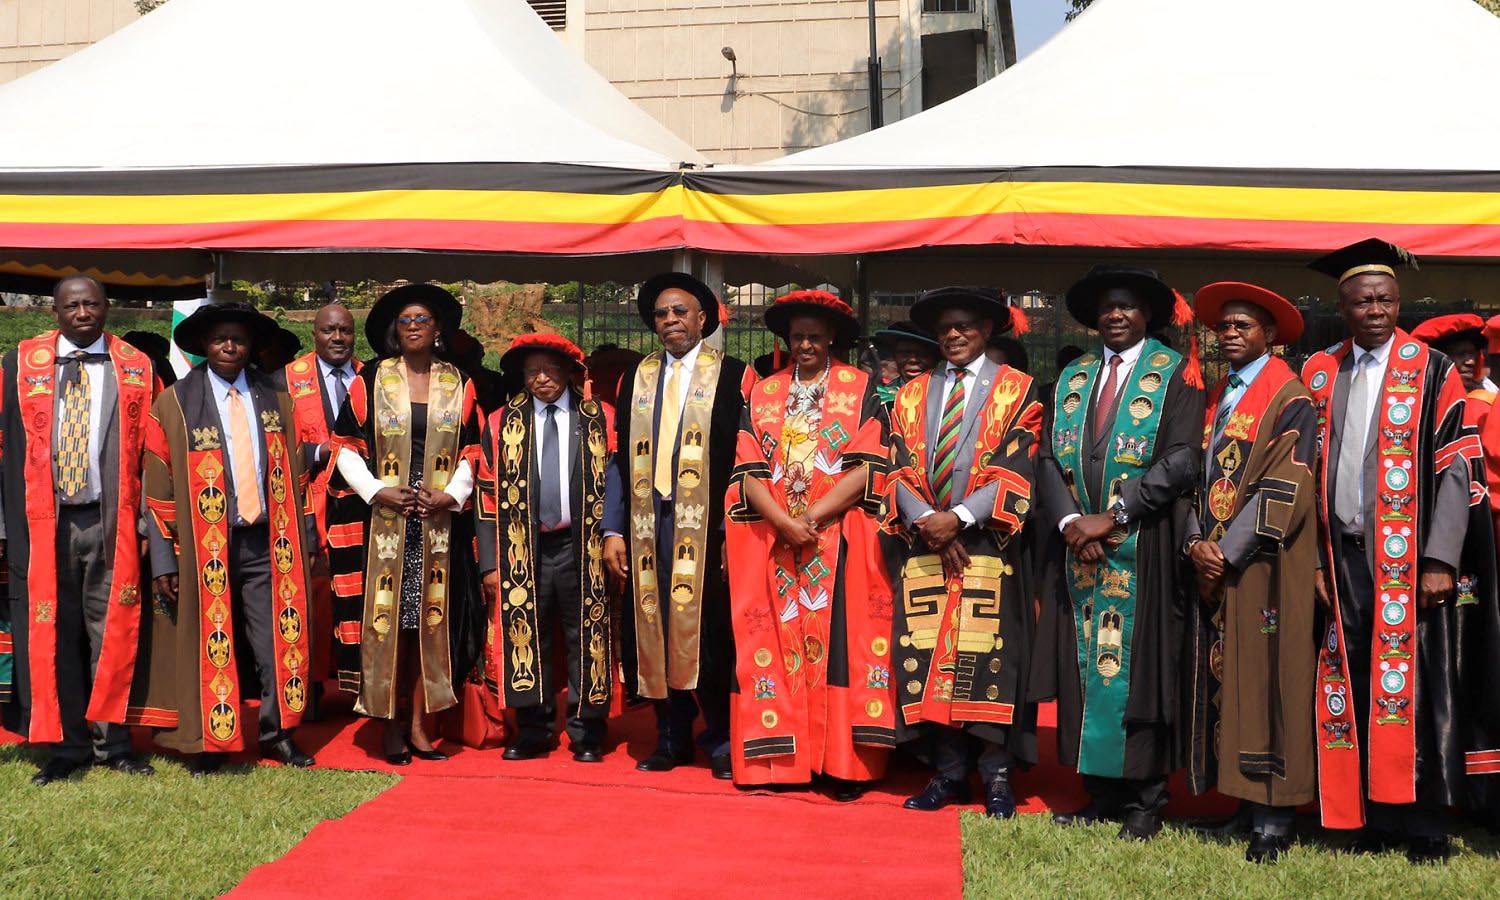 The Prime Minister-Rt. Hon. Dr. Ruhakana Rugunda (5th L) together with the First Lady and Minister of Education and Sports-Hon. Janet Museveni (5th R) pose for a photo with the Chancellor-Prof. Ezra Suruma (4th L), Chairperson Council-Mrs. Lorna Magara (3rd L), Vice Chairperson Council-Rt. Hon. Daniel Fred Kidega (3rd R), Vice Chancellor-Prof. Barnabas Nawangwe (4th R), DVCAA-Dr. Umar Kakumba (2nd R), DVCFA-Prof. William Bazeyo (2nd L), Academic Registrar-Mr. Alfred Masikye Namoah (R), Principal CHS-Prof. C